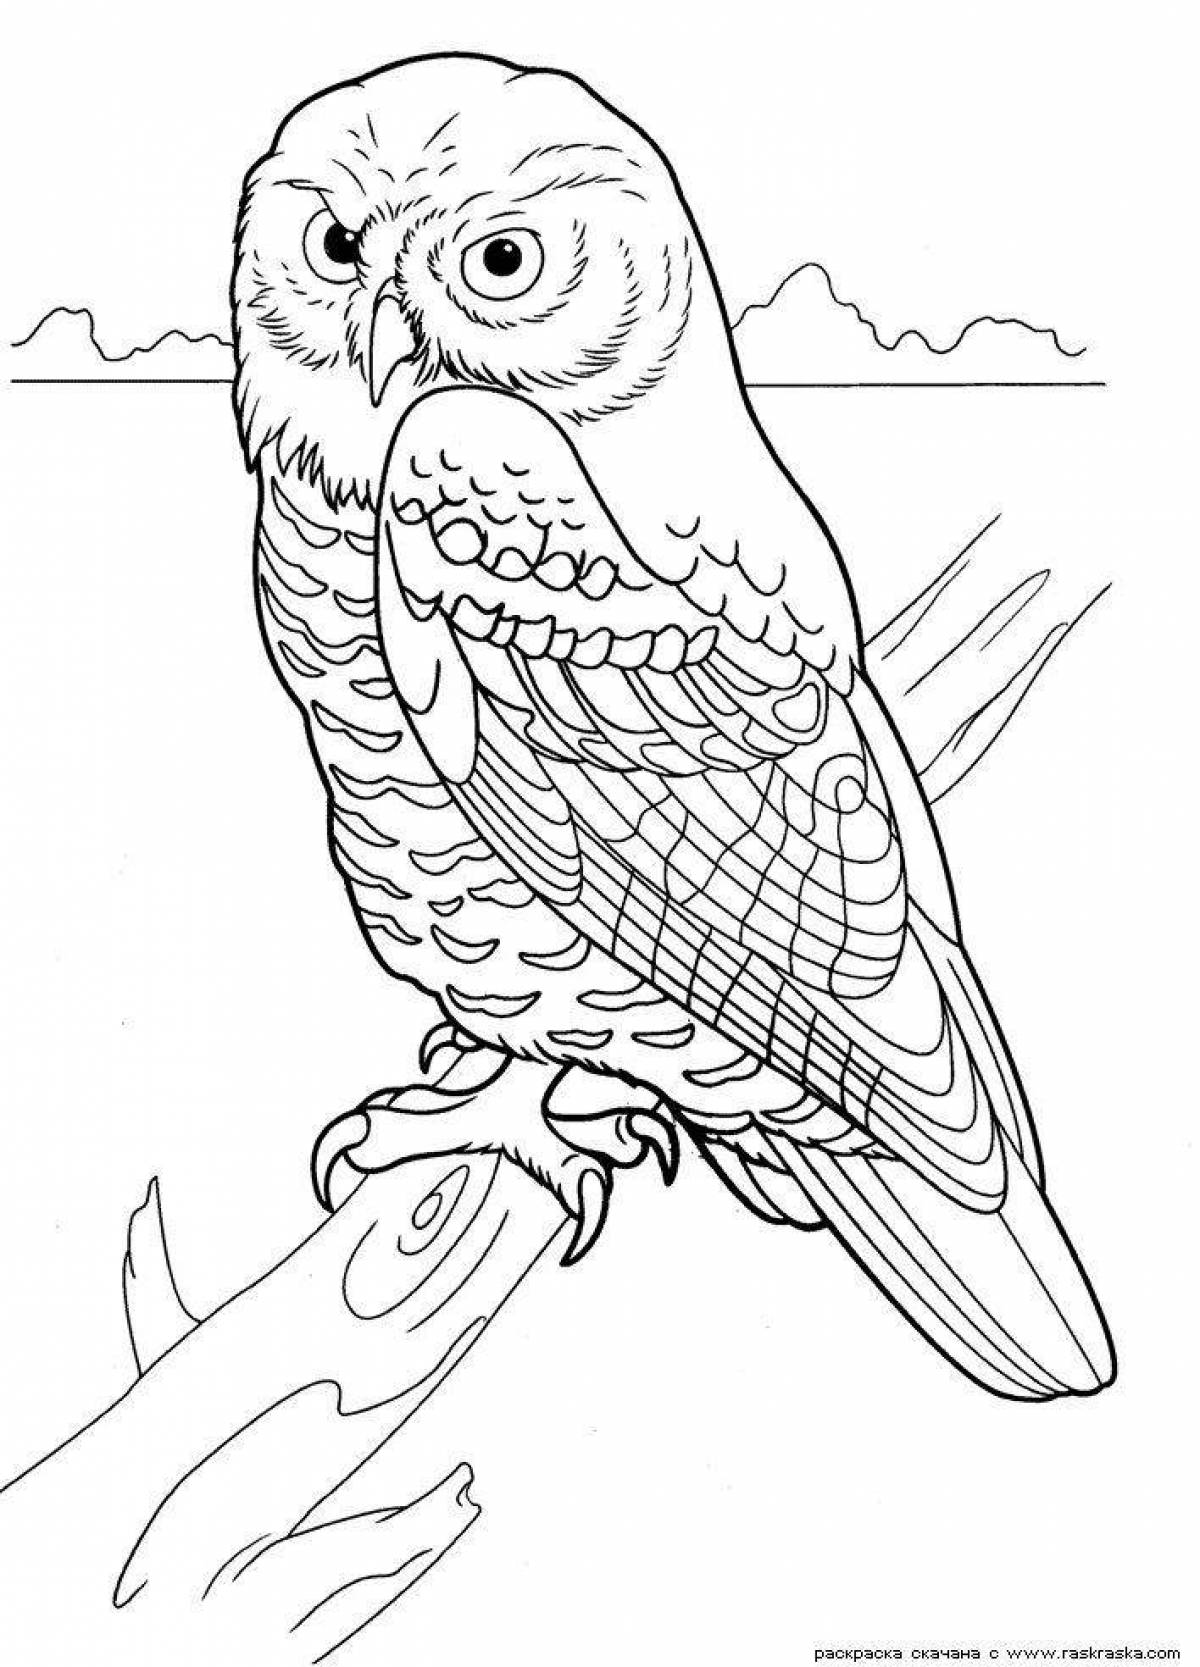 Owl picture #3